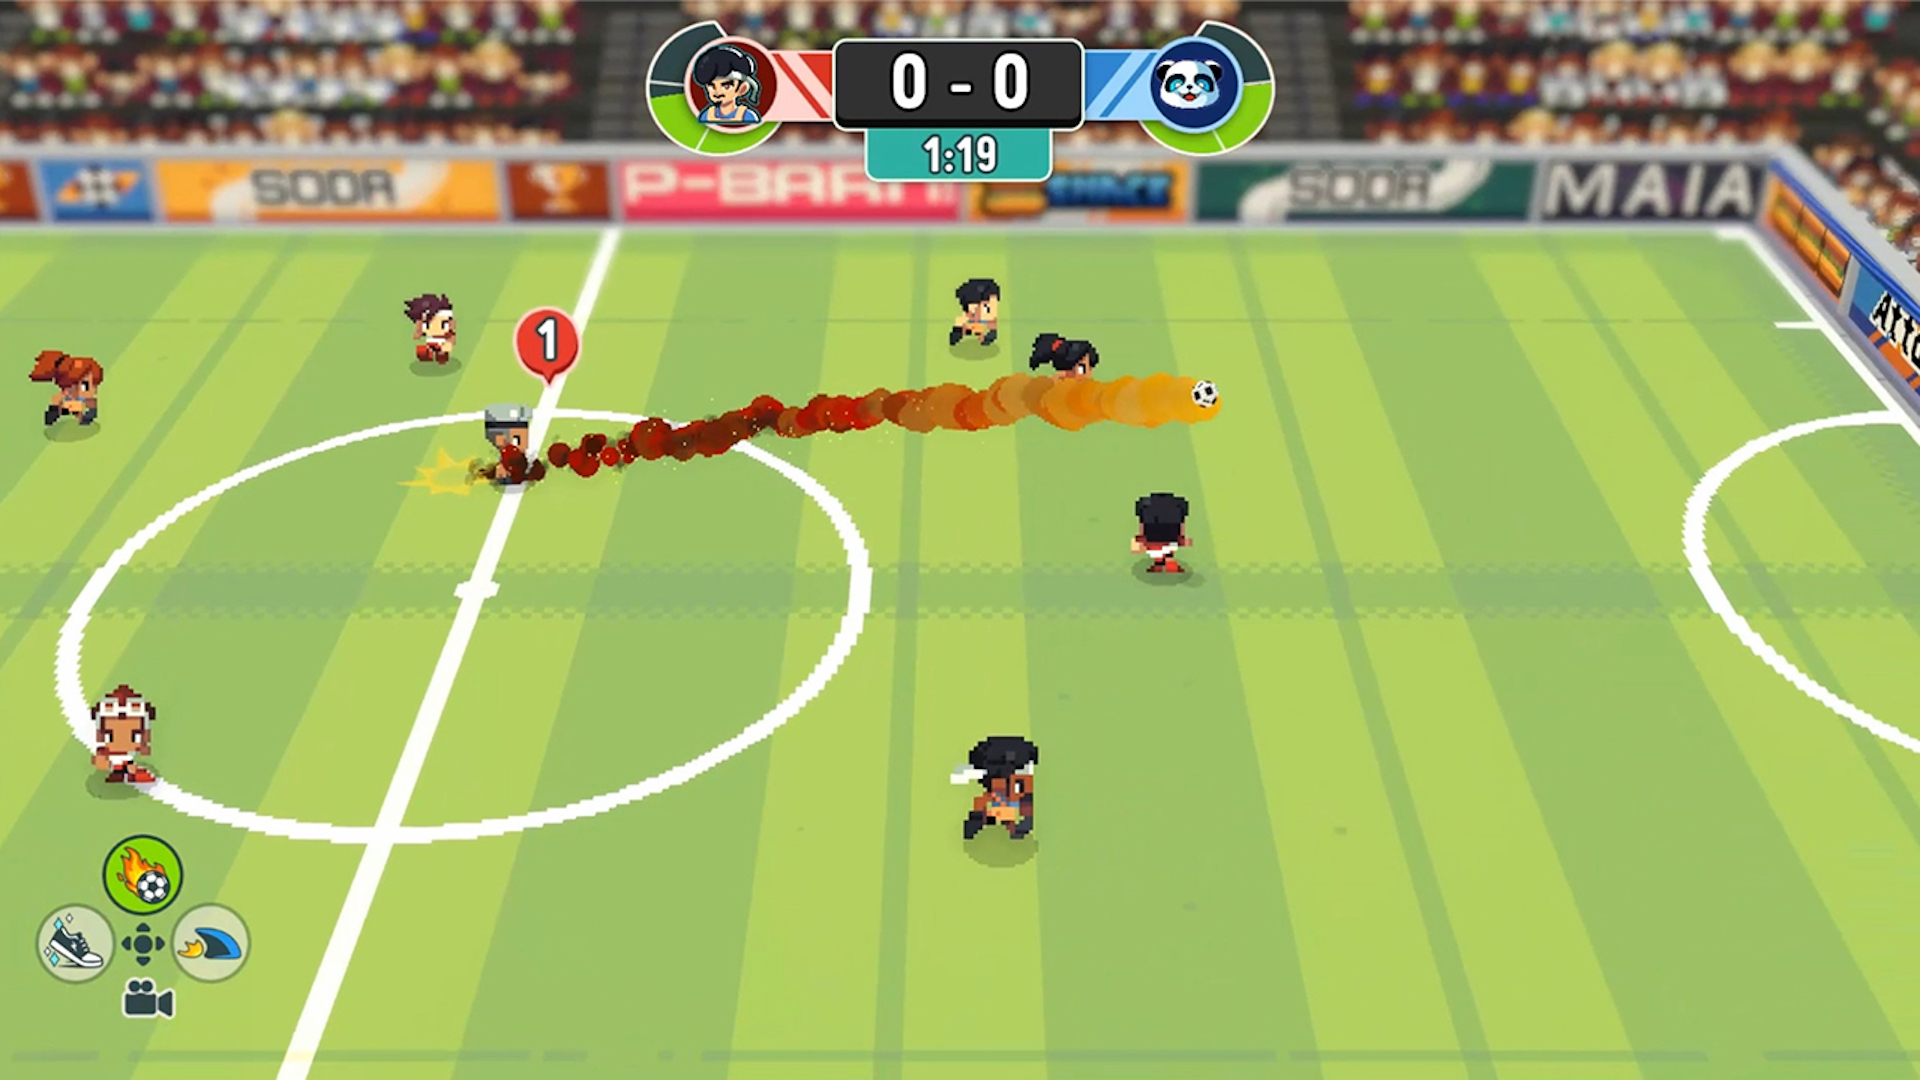 FOOTBALL LEAGUE 2023, NEW OFFLINE FOOTBALL GAME FOR ANDROID